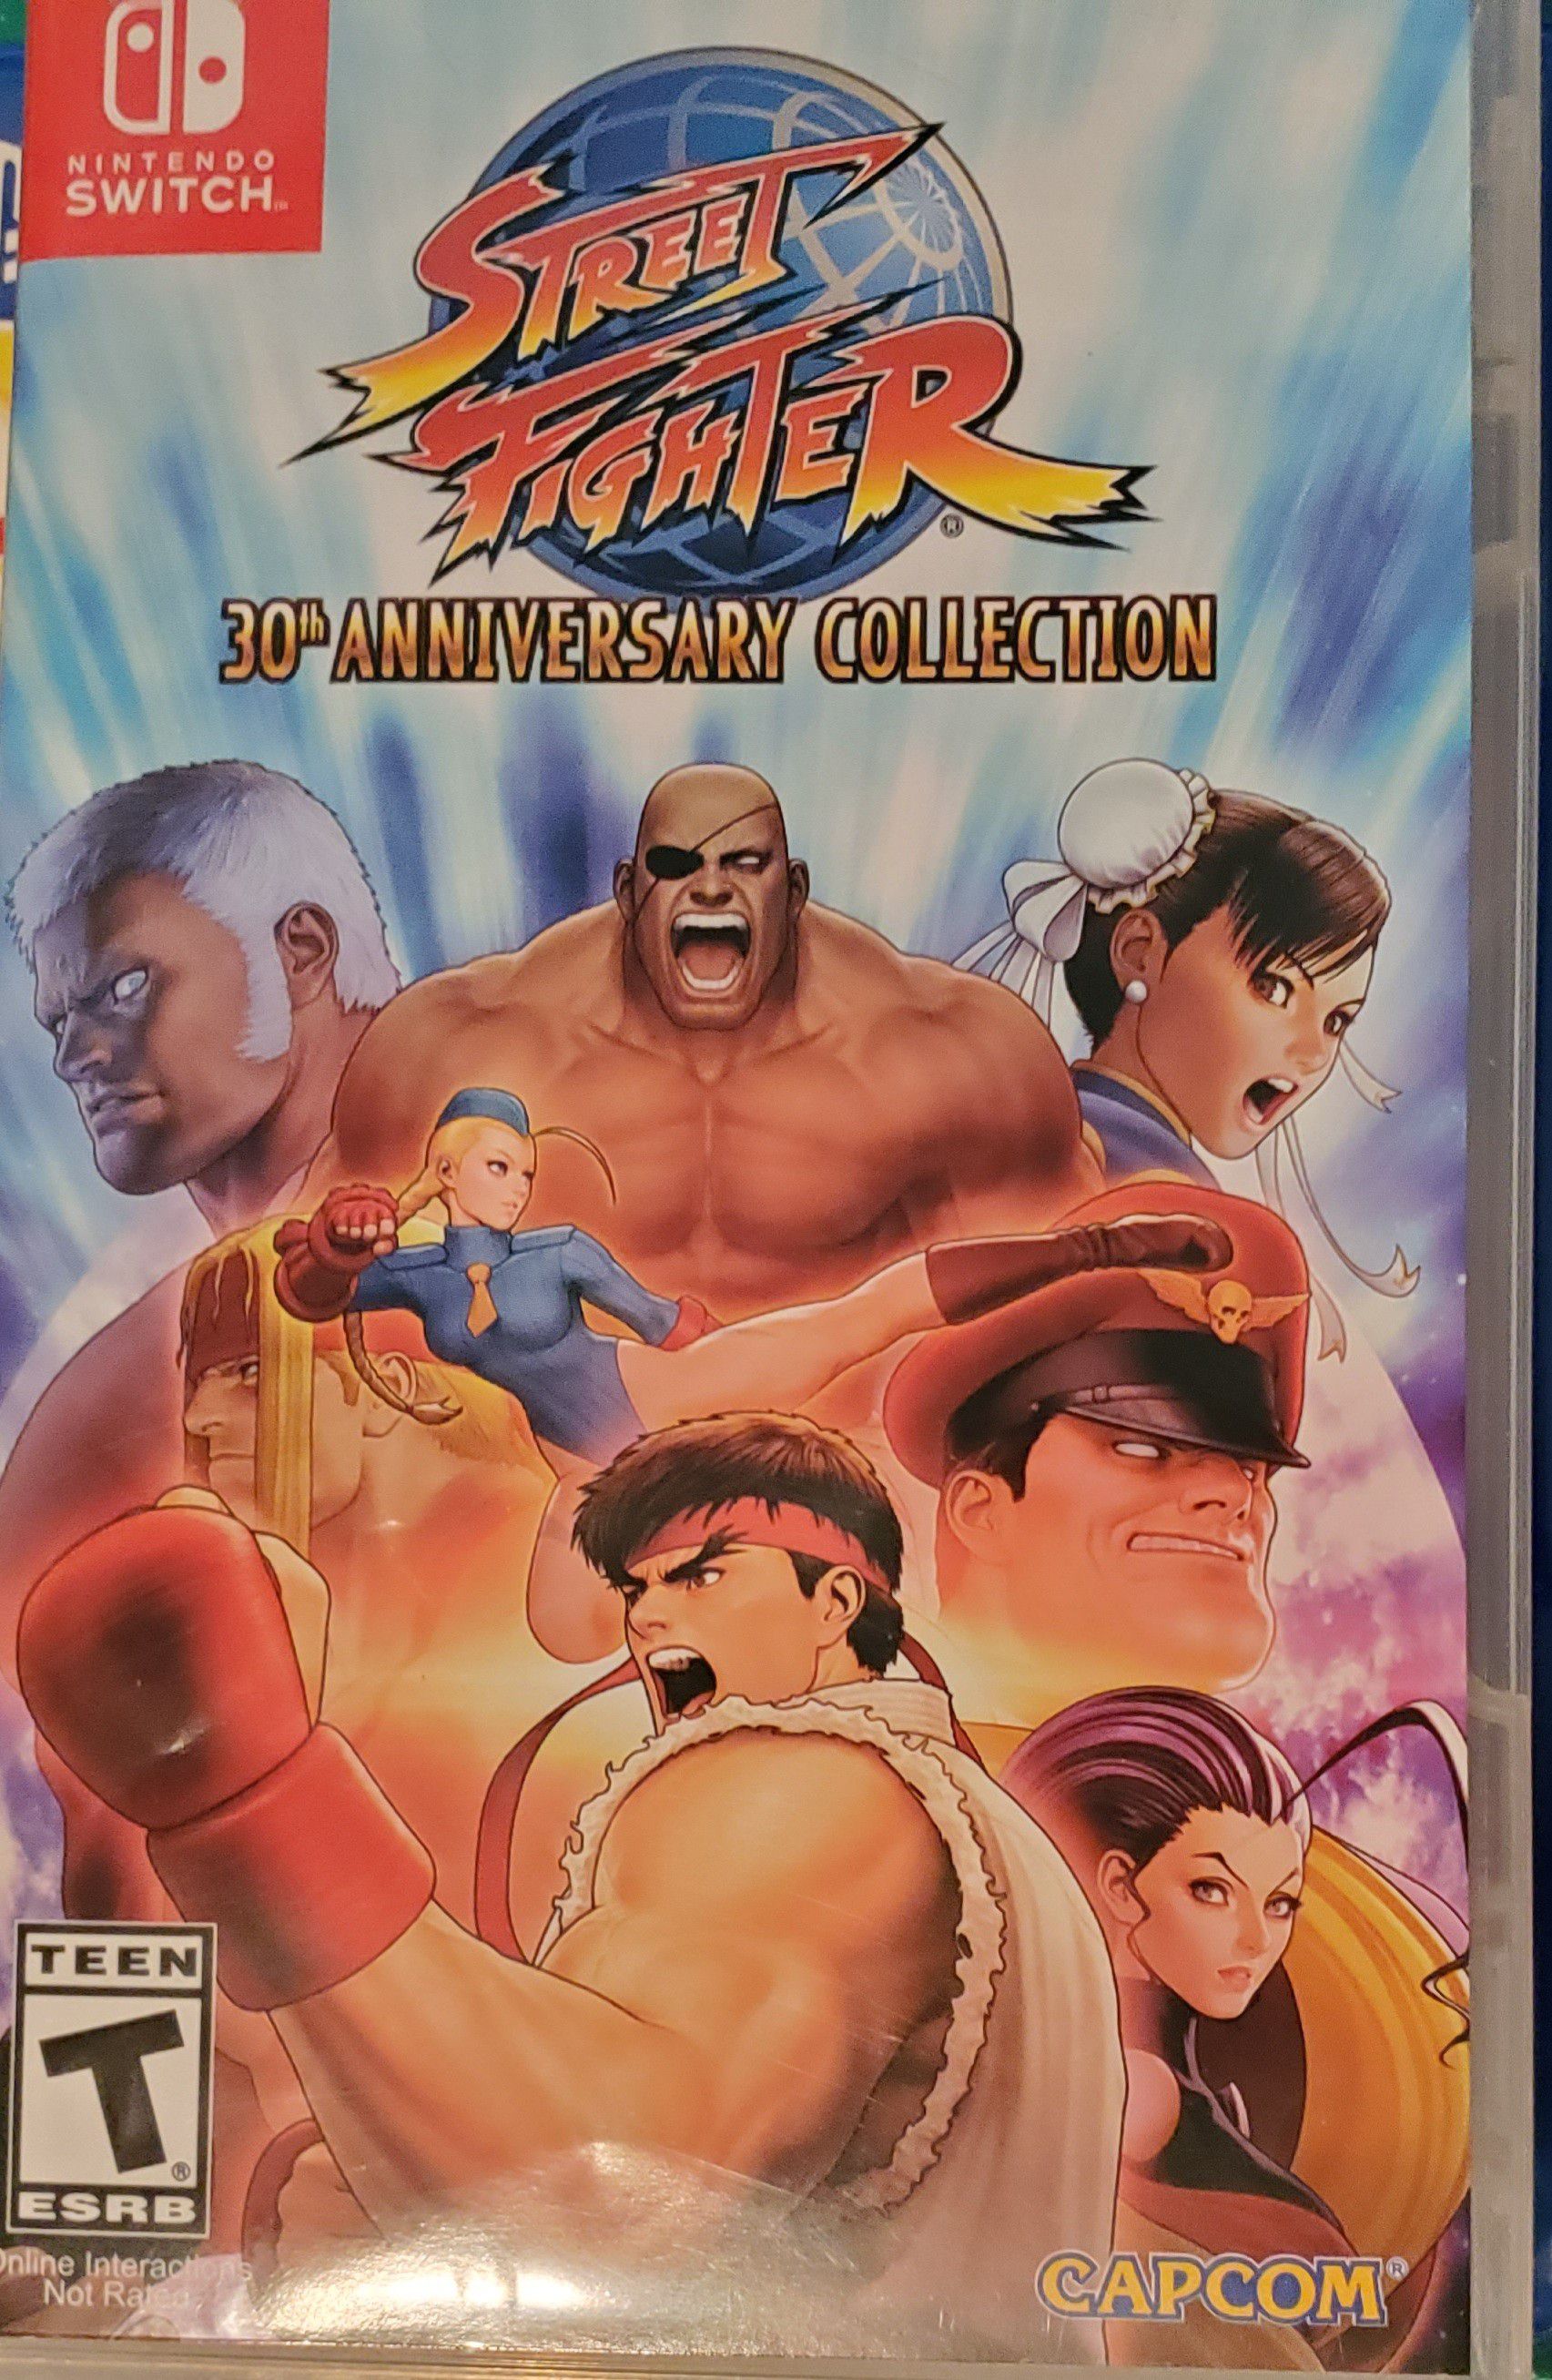 Street Fighter 30th Anniversary Collection, Nintendo Switch